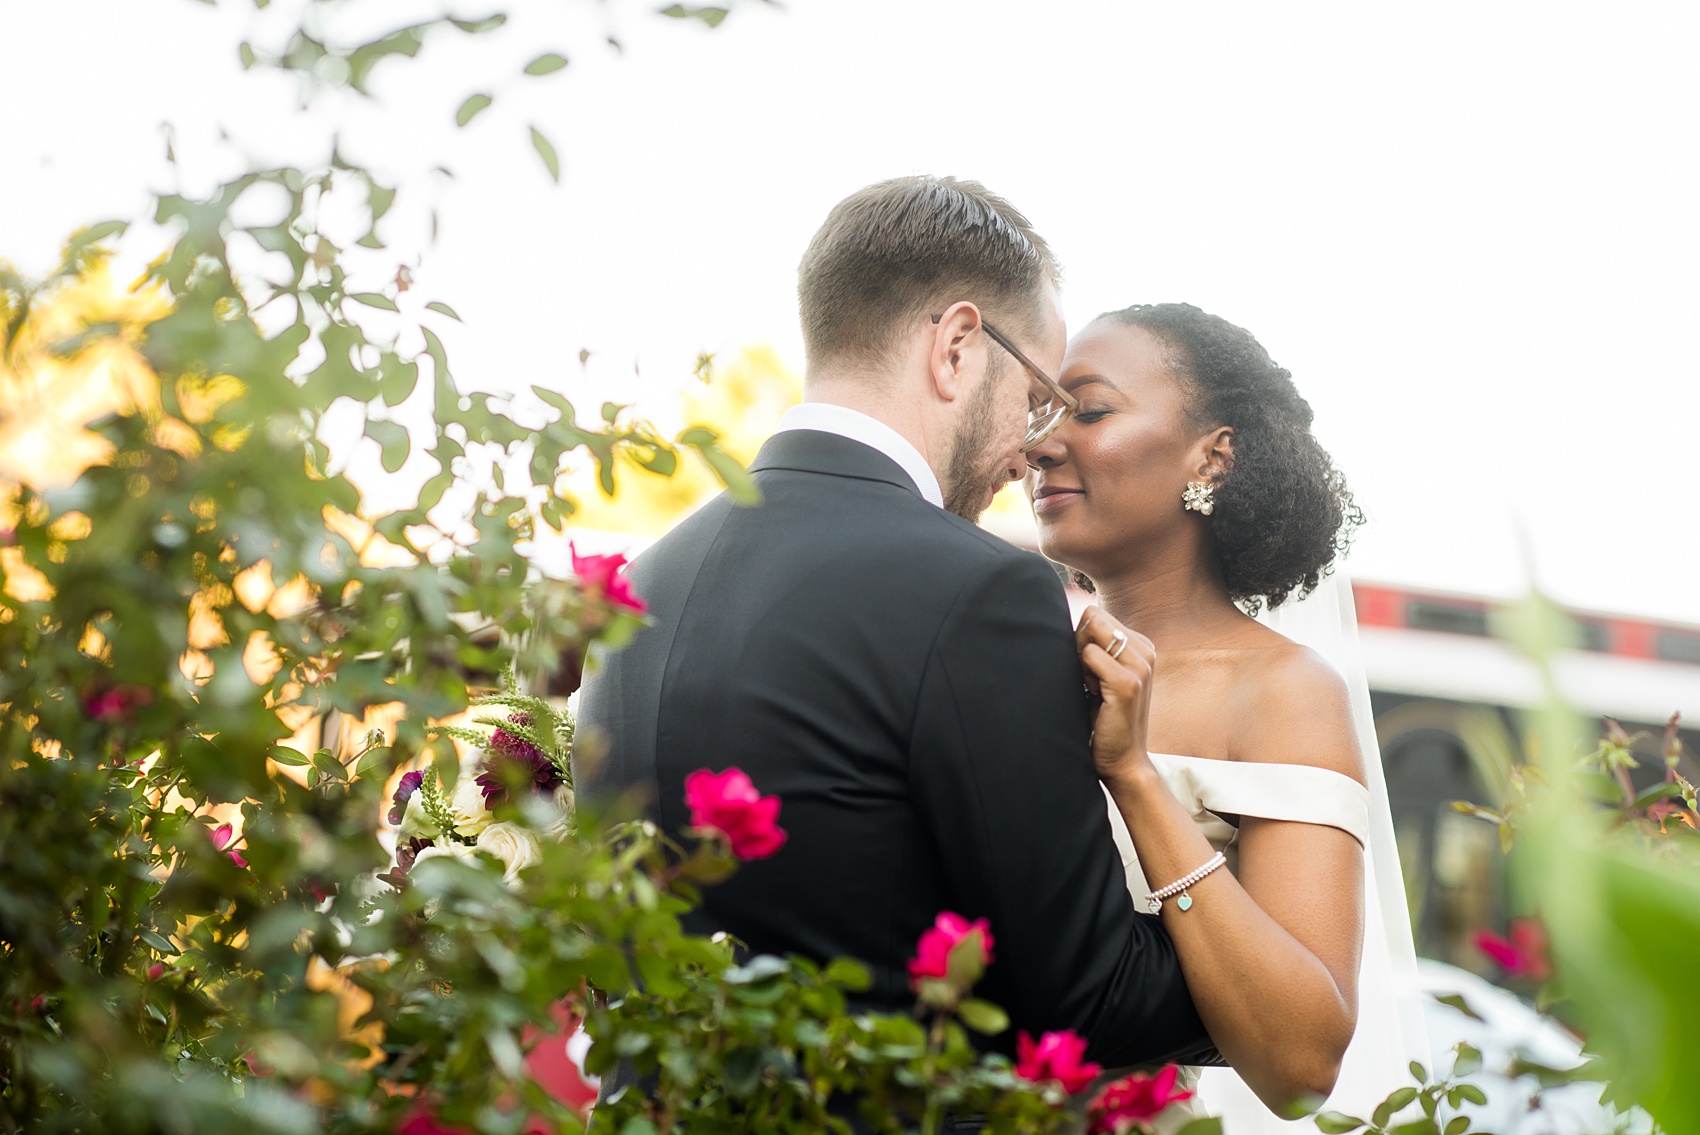 A fall wedding with burgundy, dusty rose and grey details. Mikkel Paige Photography, photographer in Greenville NC and Raleigh, captured this wedding at Rock Springs Center, planned by @vivalevent. The bride and groom had beautiful photos during golden hour on an autumn day! Click through for details! #mikkelpaige NCwedding #northcarolinawedding #southernwedding #brideandgroom